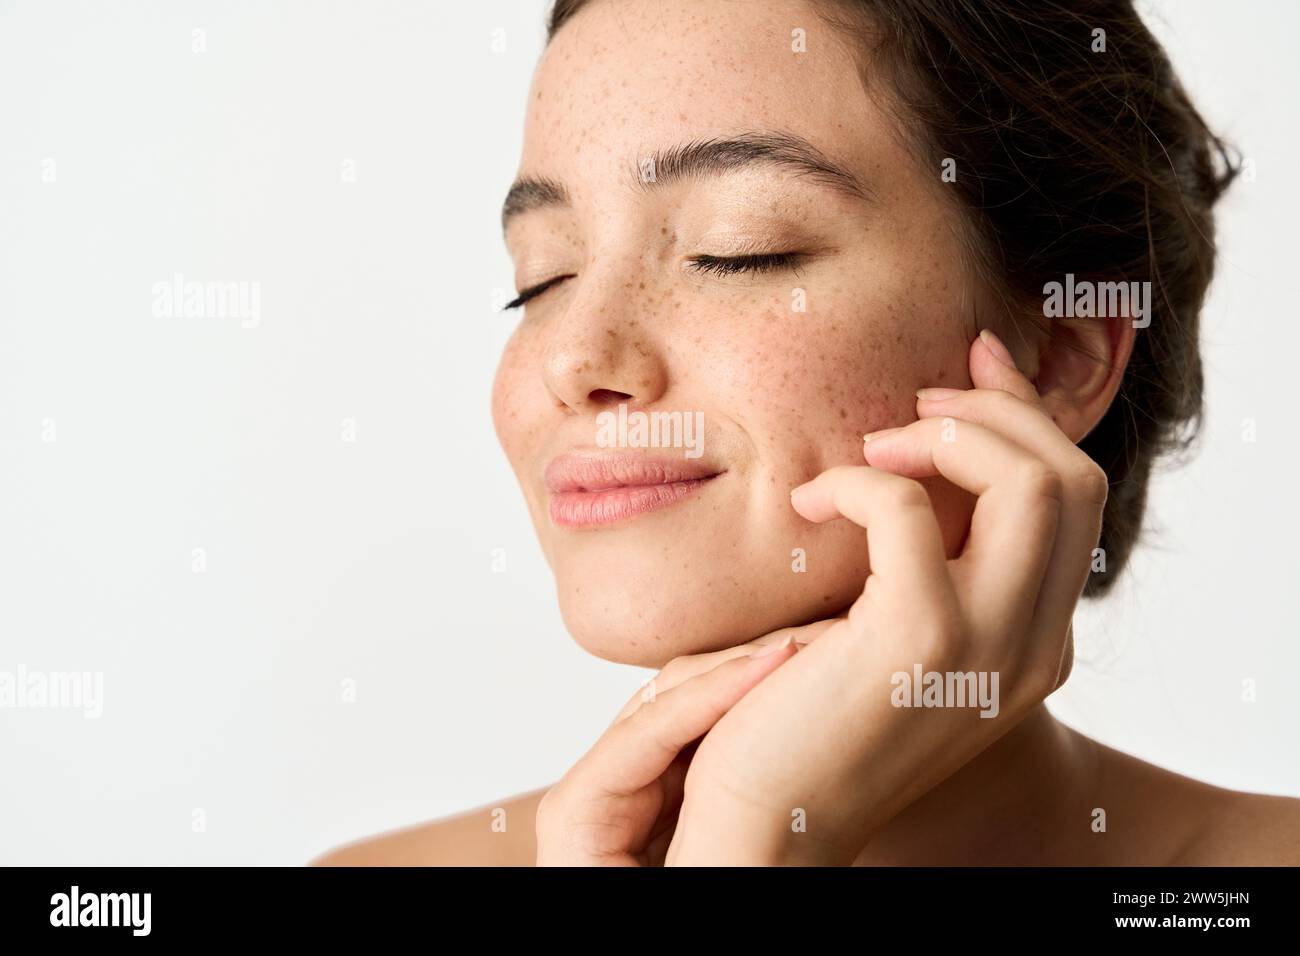 Beauty photo of smiling young woman with freckles on face isolate on white. Stock Photo